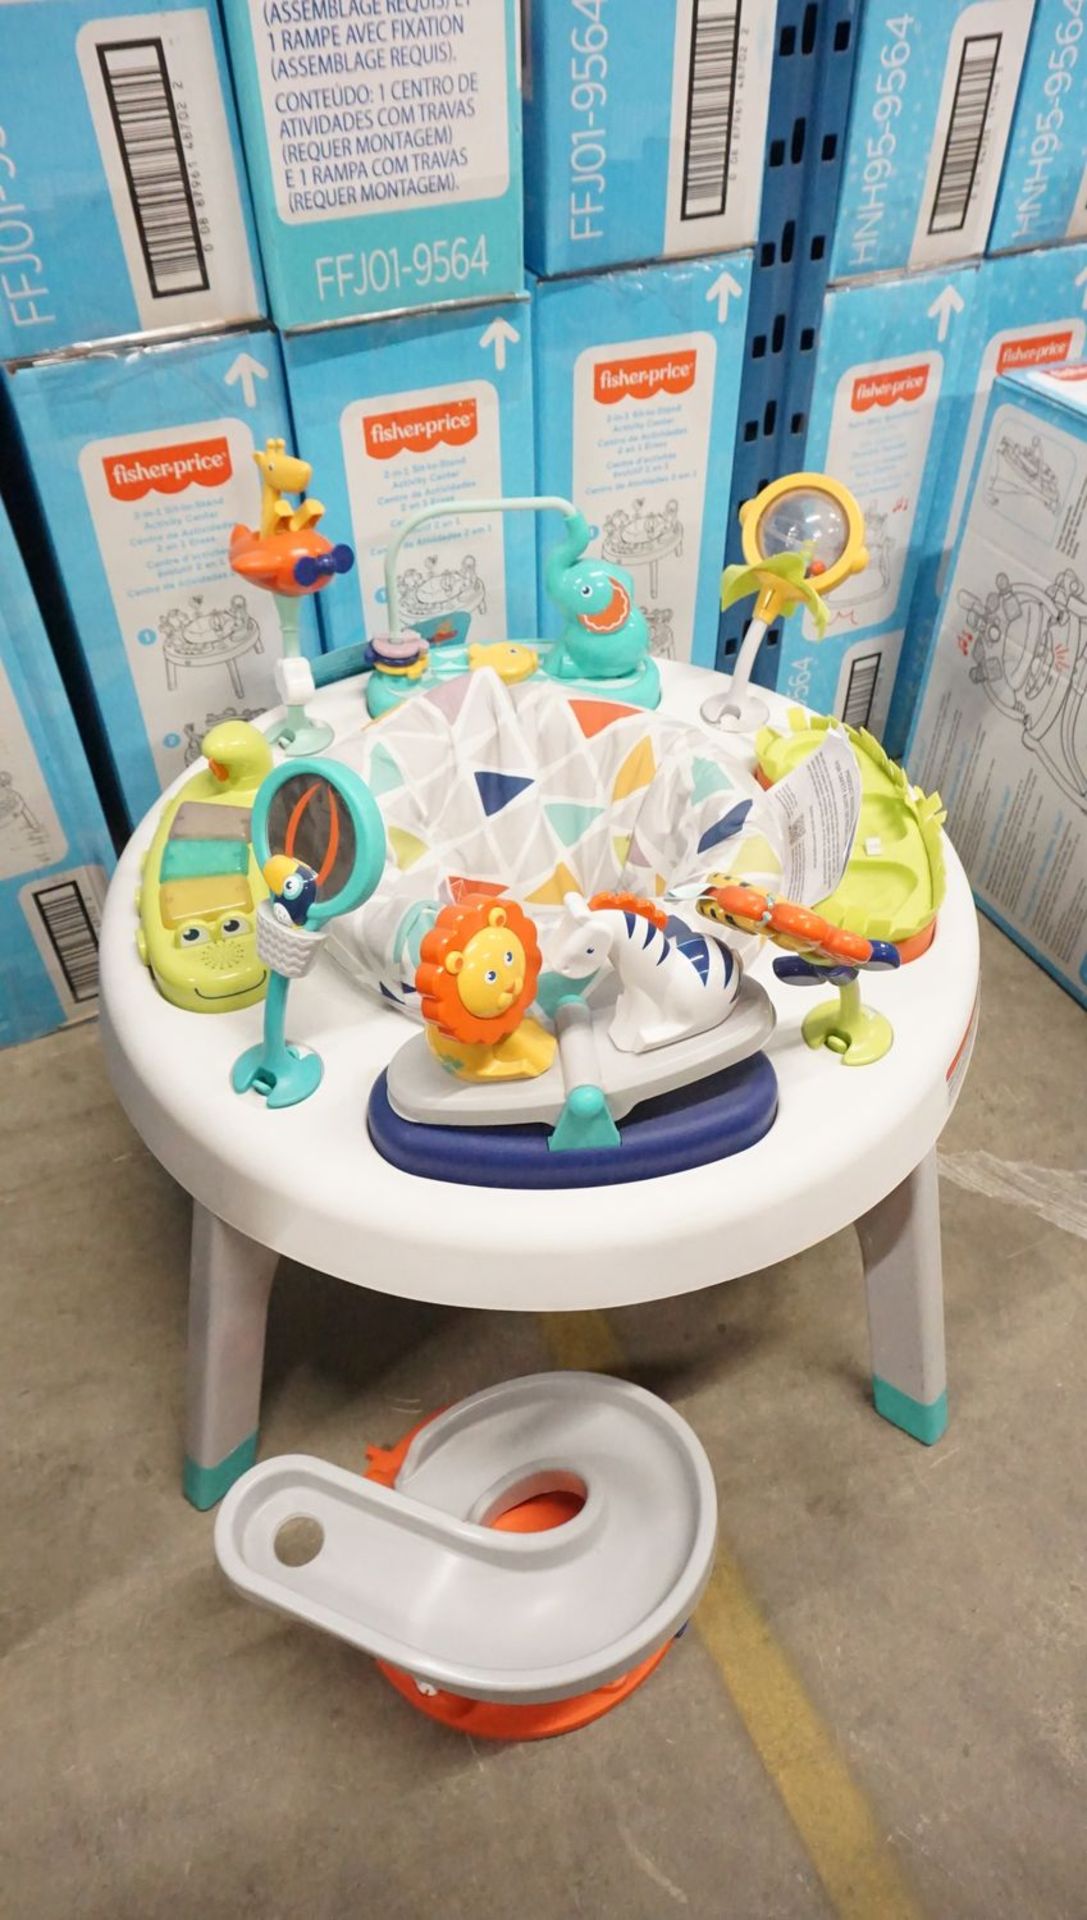 UNITS - FISHER PRICE 2-IN-1 SIT & STAND ACTIVITY CENTRE (FFJ01-9564) (MSRP 129.99) - Image 2 of 2